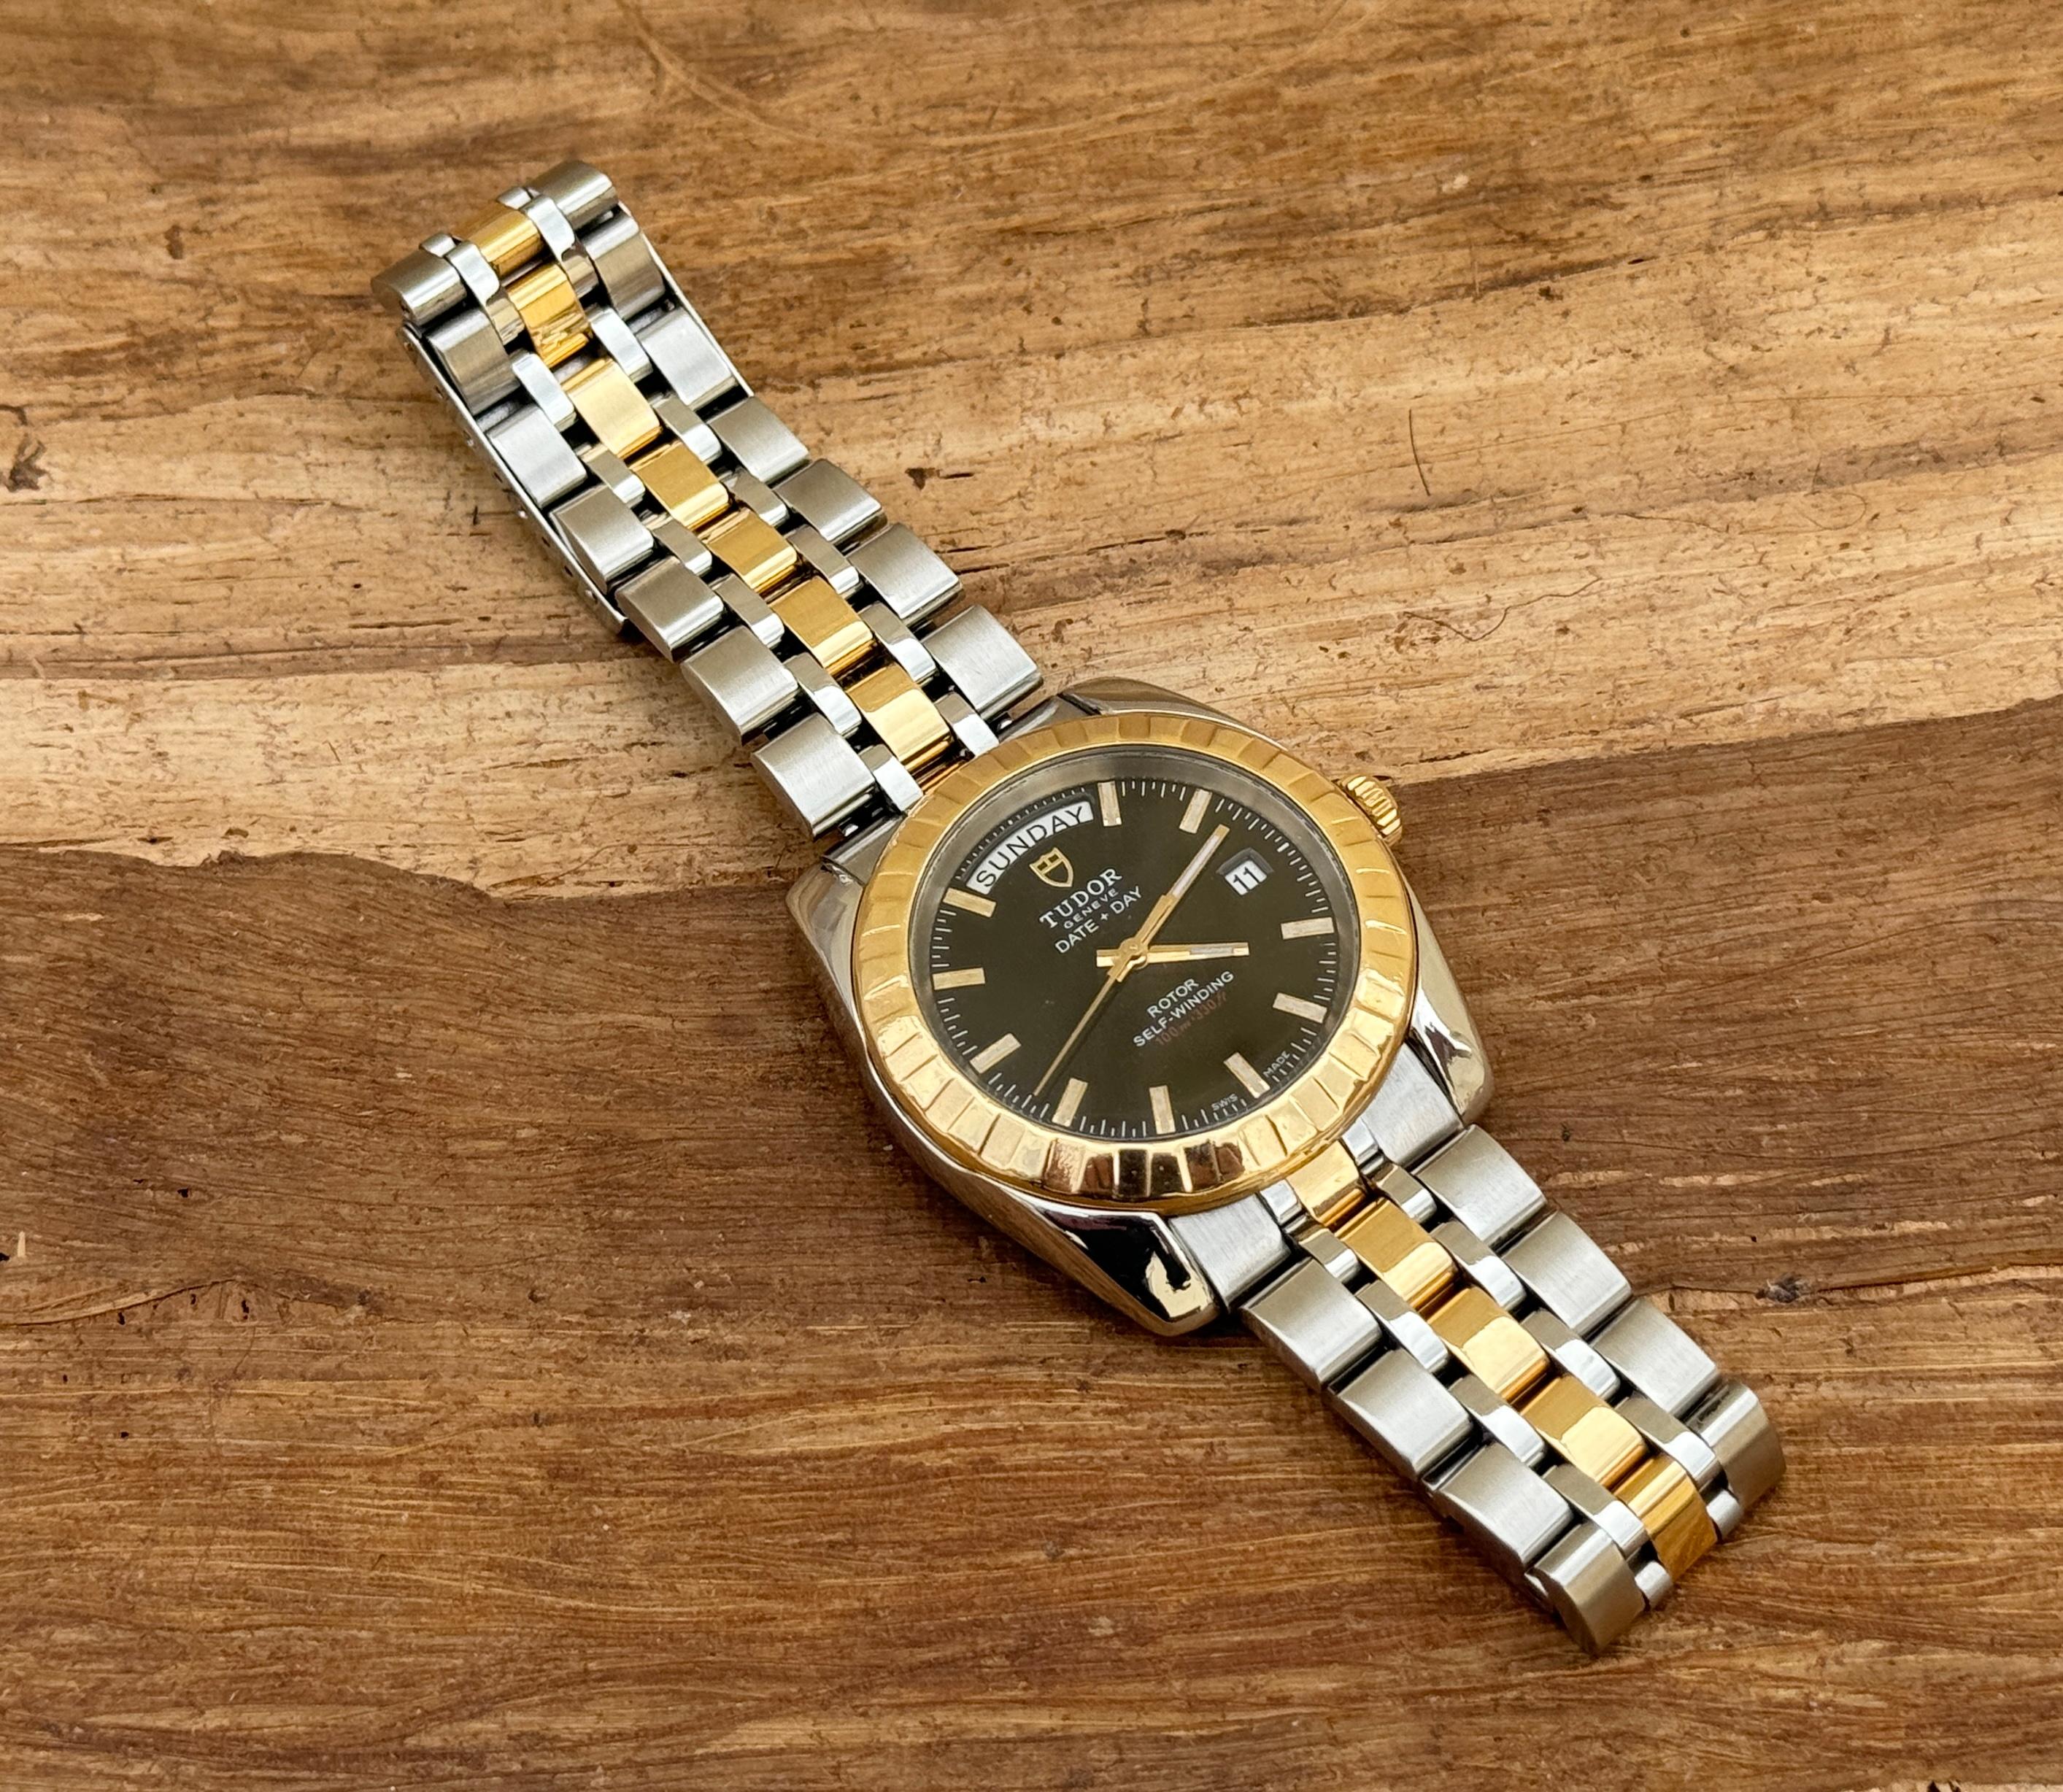 Brand: Tudor

Model: Classic Day Date

Reference Number: 23013

Country Of Manufacture: Switzerland

Movement: Automatic

Case Material: Gold/Steel

Measurements : 40 mm. (without crown)

Band Type : Gold/Steel

Band Condition : In Excellent